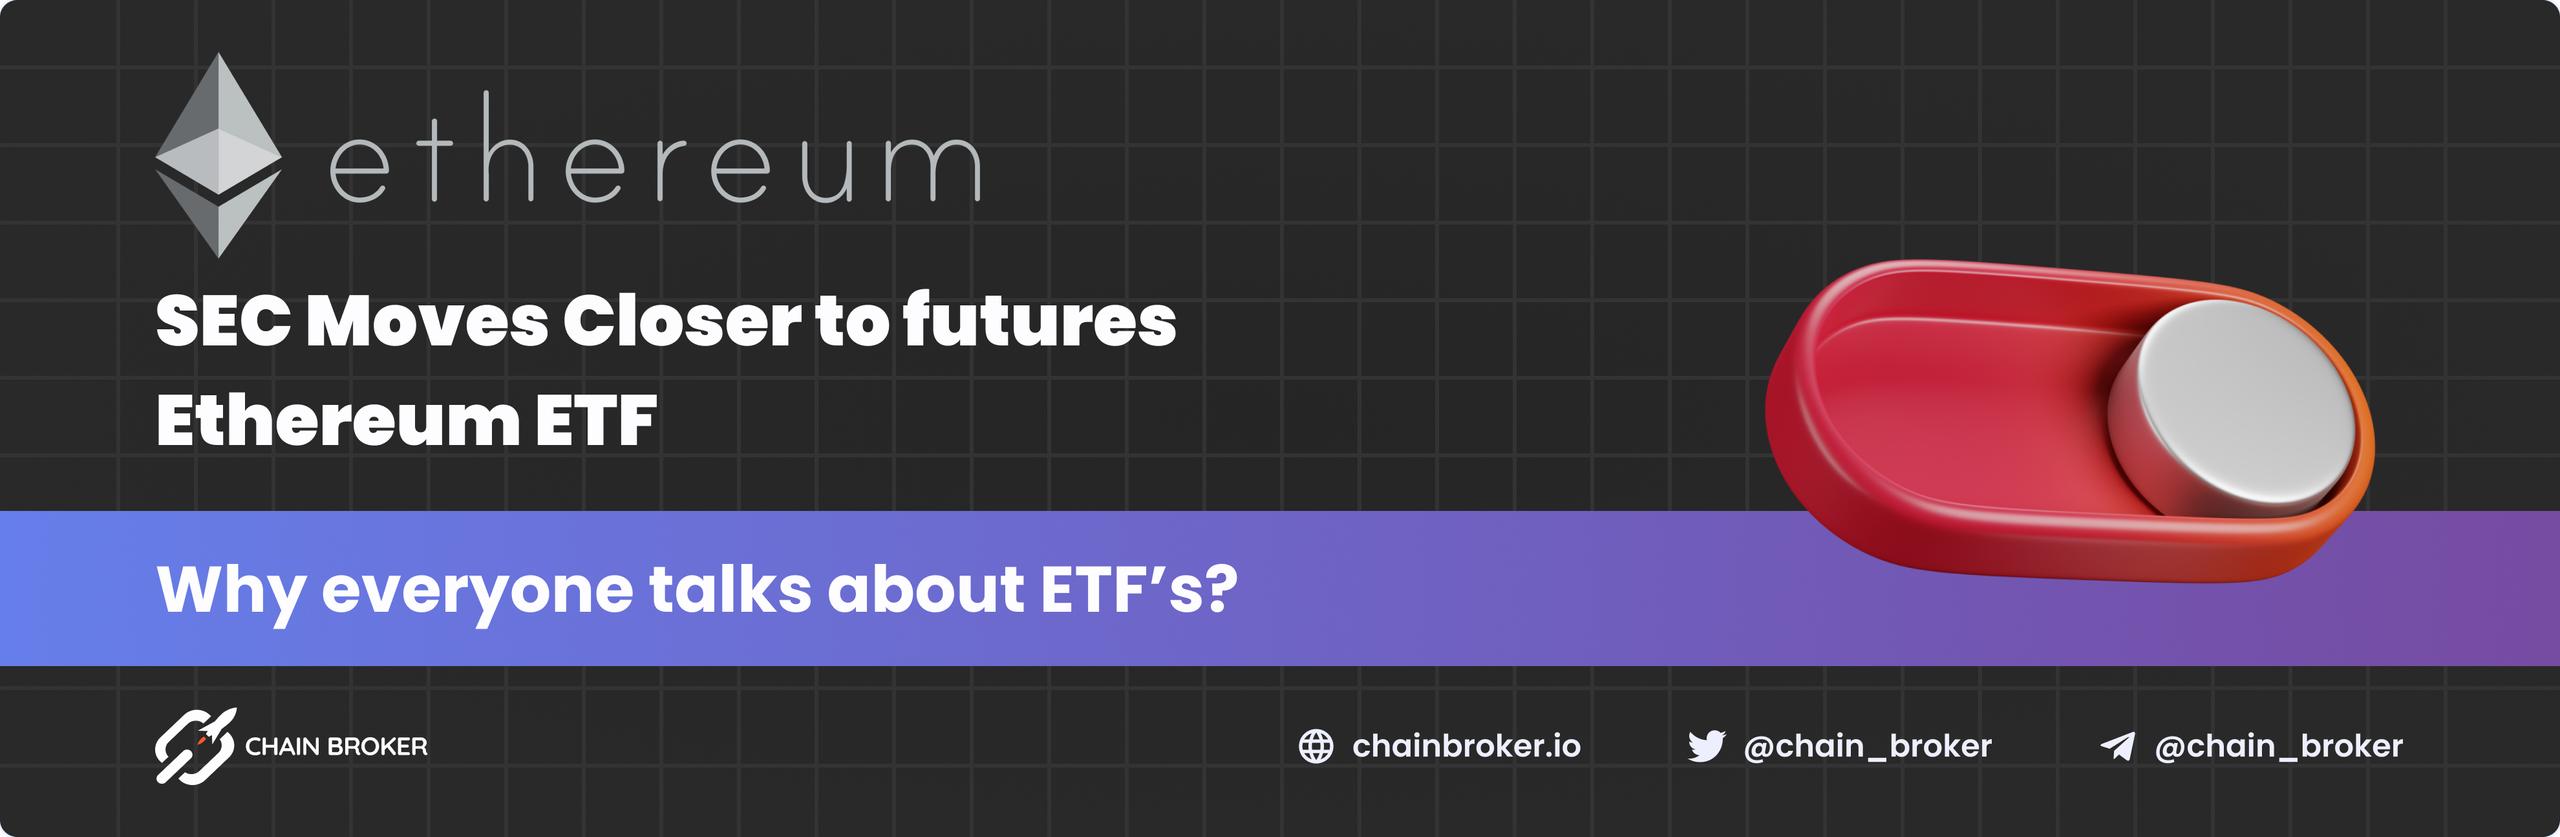 Industry waits for SEC's decision on Ethereum Futures ETF's.